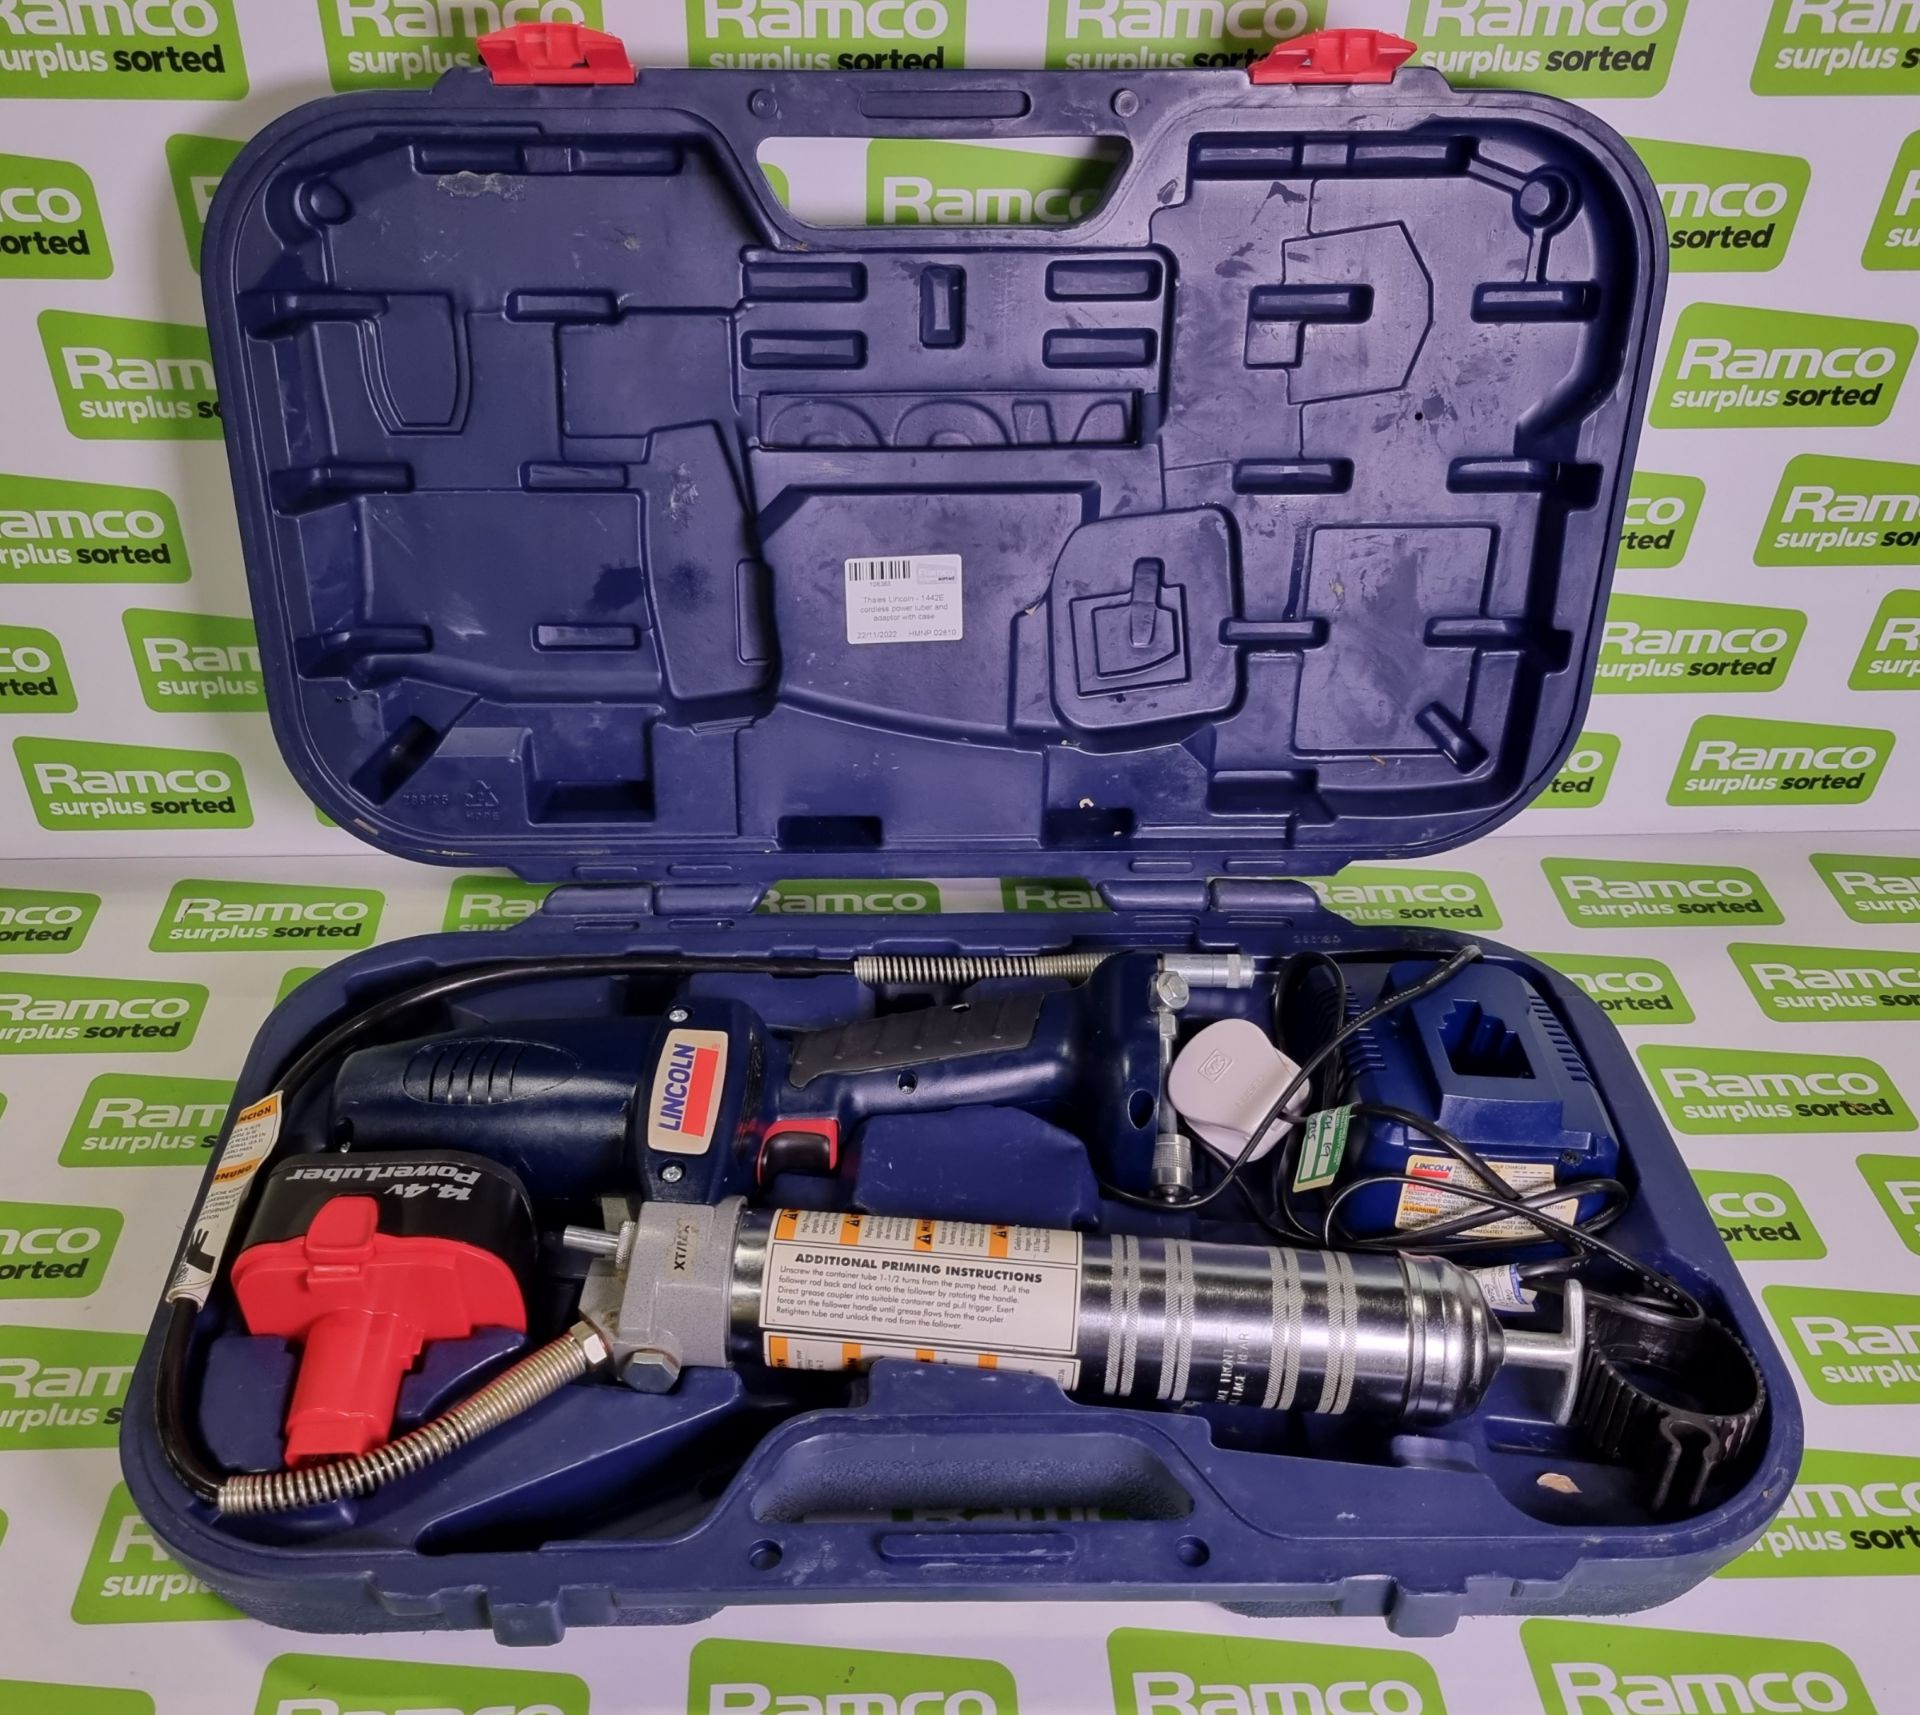 Thales Lincoln - 1442E cordless powerluber and adaptor with case - Image 2 of 5